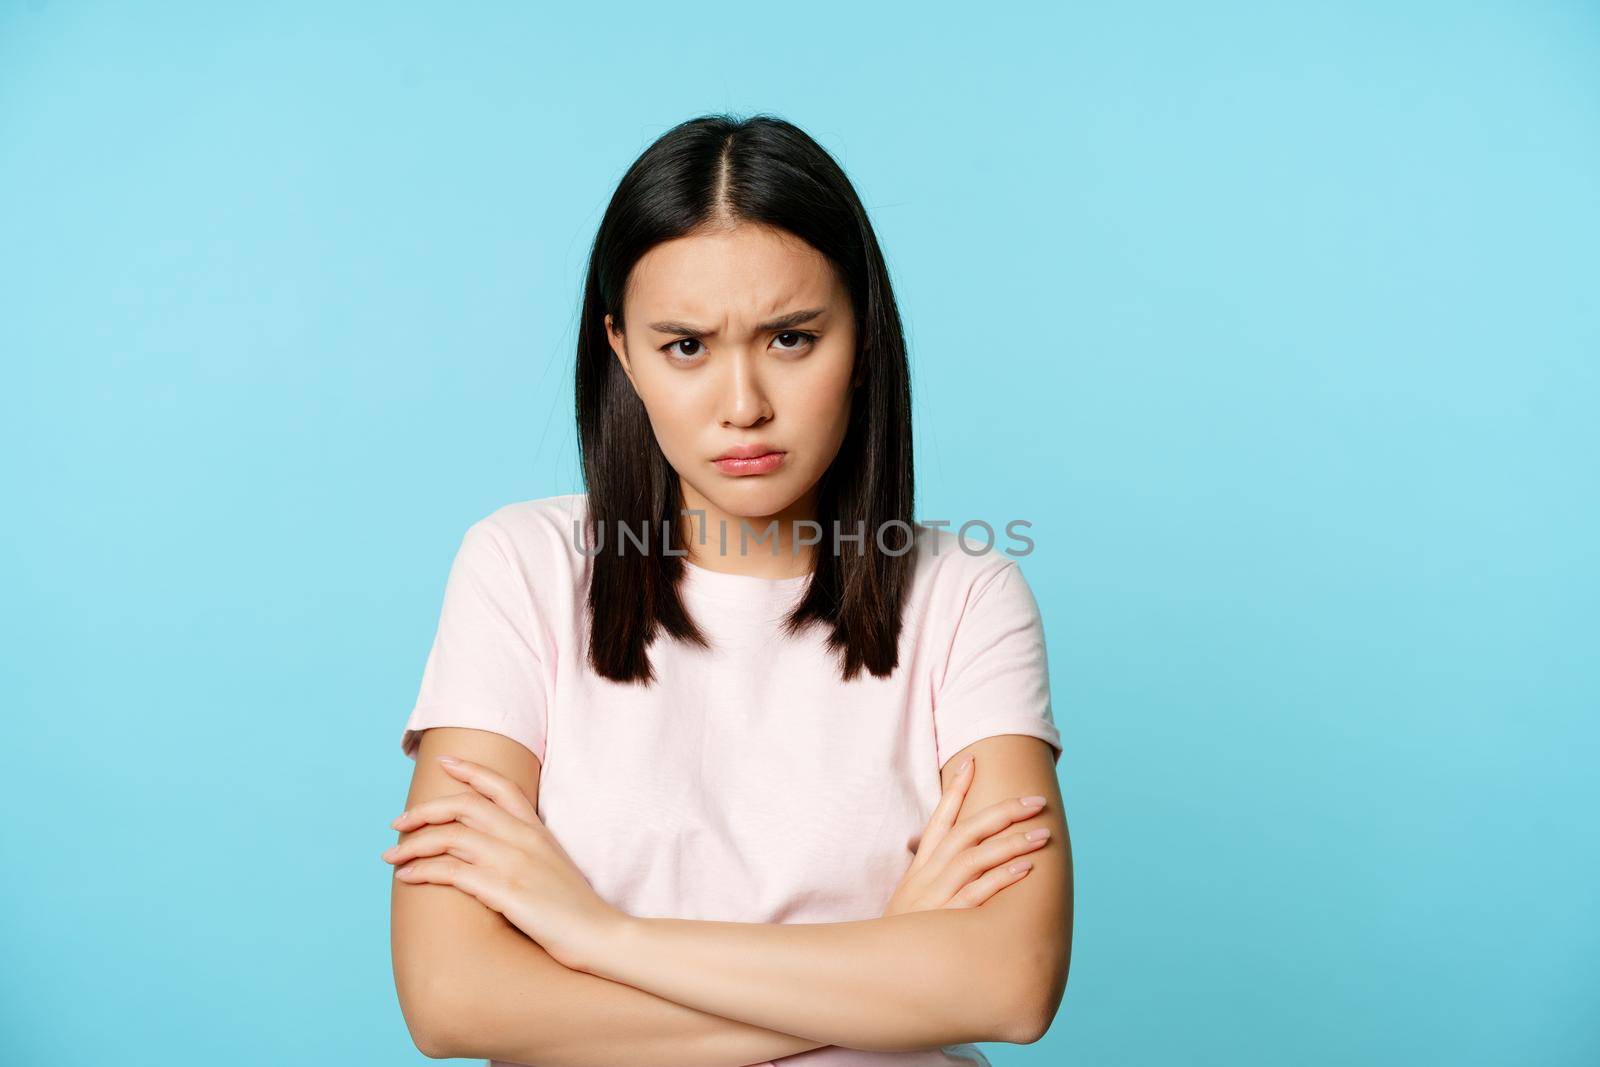 Angry teen asian girl standing in offended pose, frowning and sulking, feeling defensive, standing disappointed over blue background.